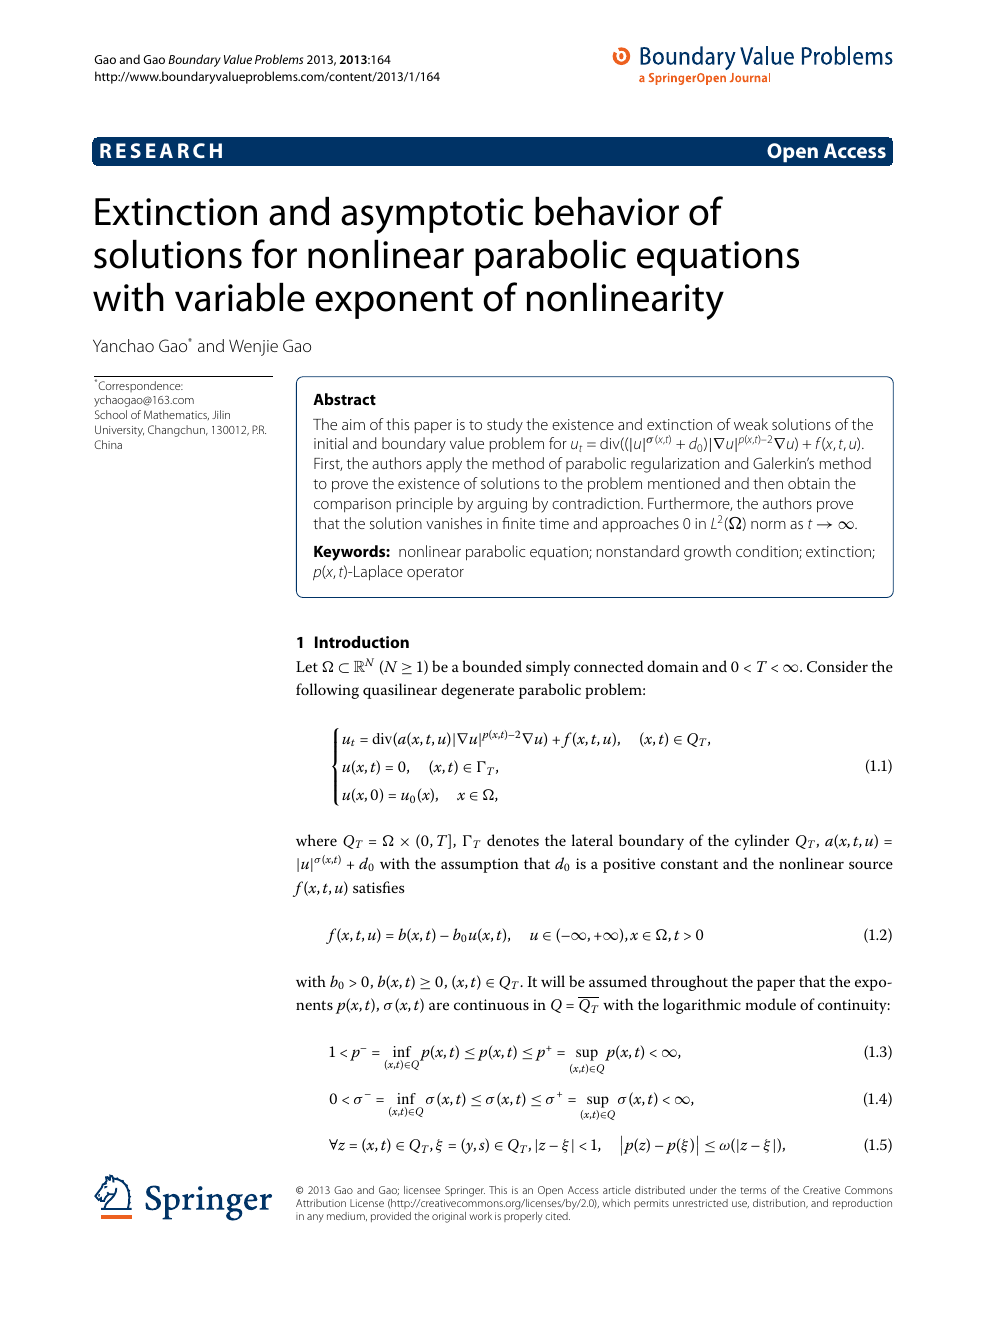 Extinction And Asymptotic Behavior Of Solutions For Nonlinear Parabolic Equations With Variable Exponent Of Nonlinearity Topic Of Research Paper In Mathematics Download Scholarly Article Pdf And Read For Free On Cyberleninka